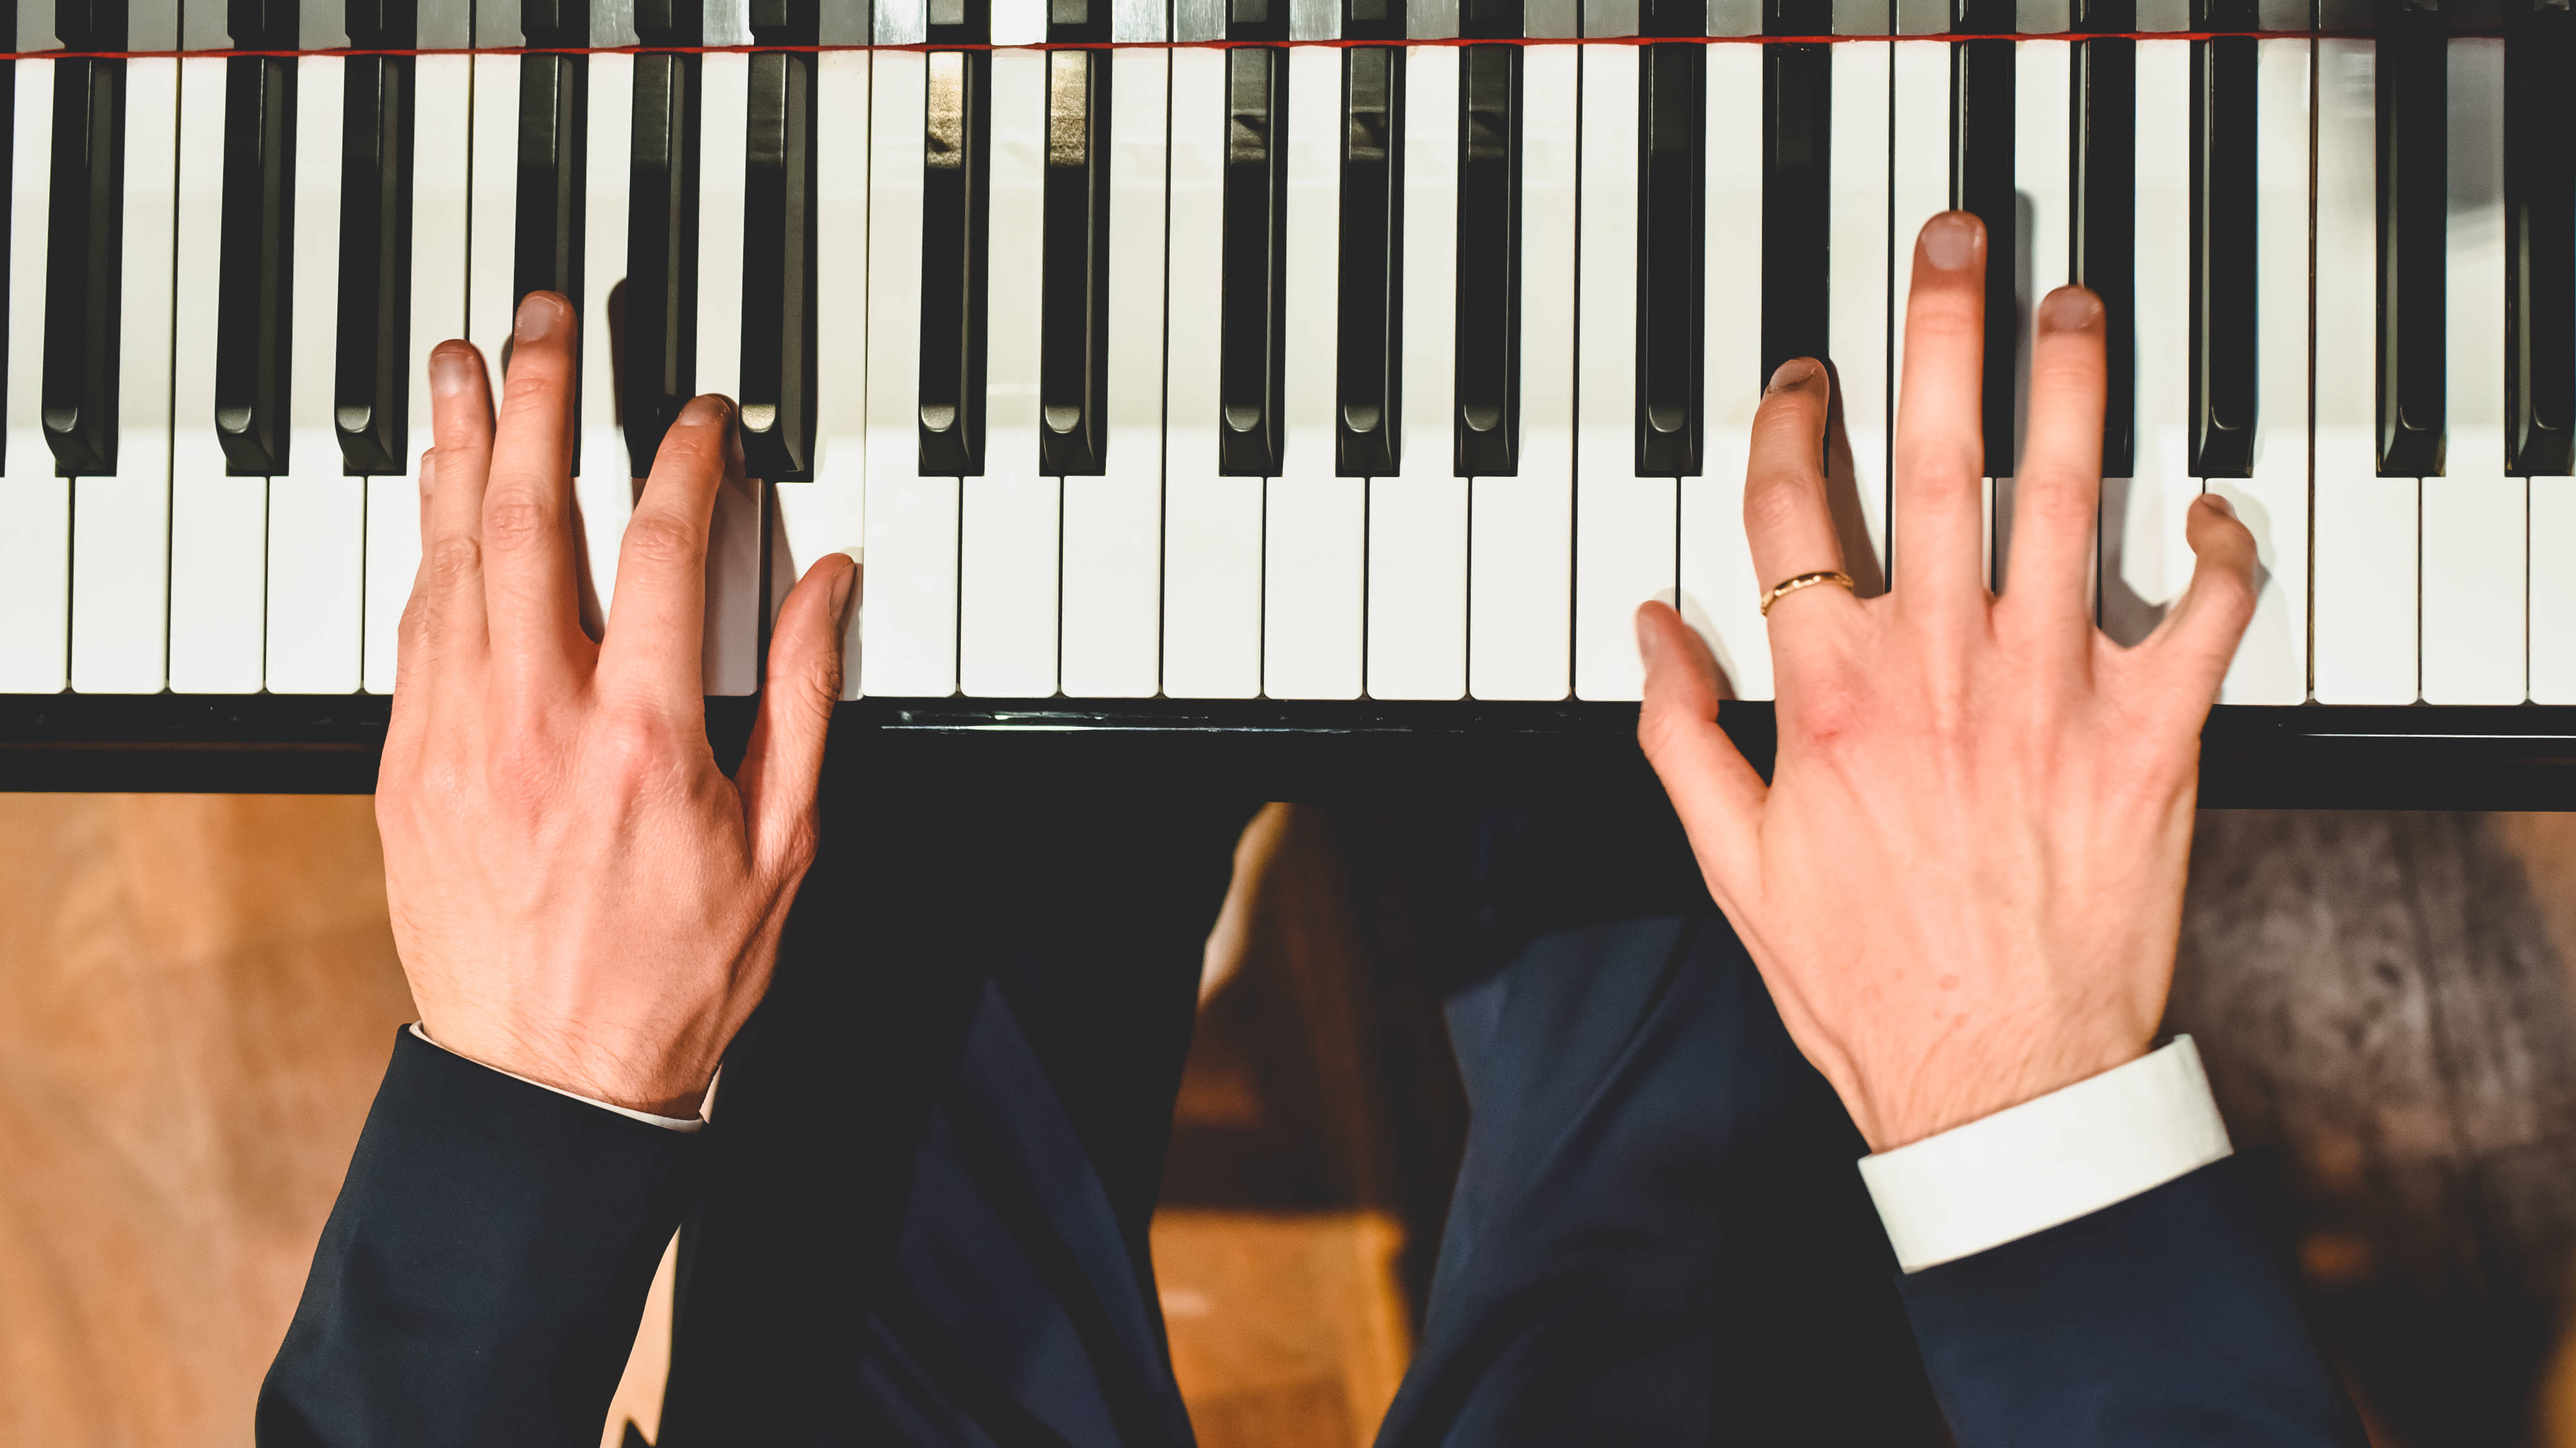 29 easy classical piano pieces to get you started on keys - Classic FM